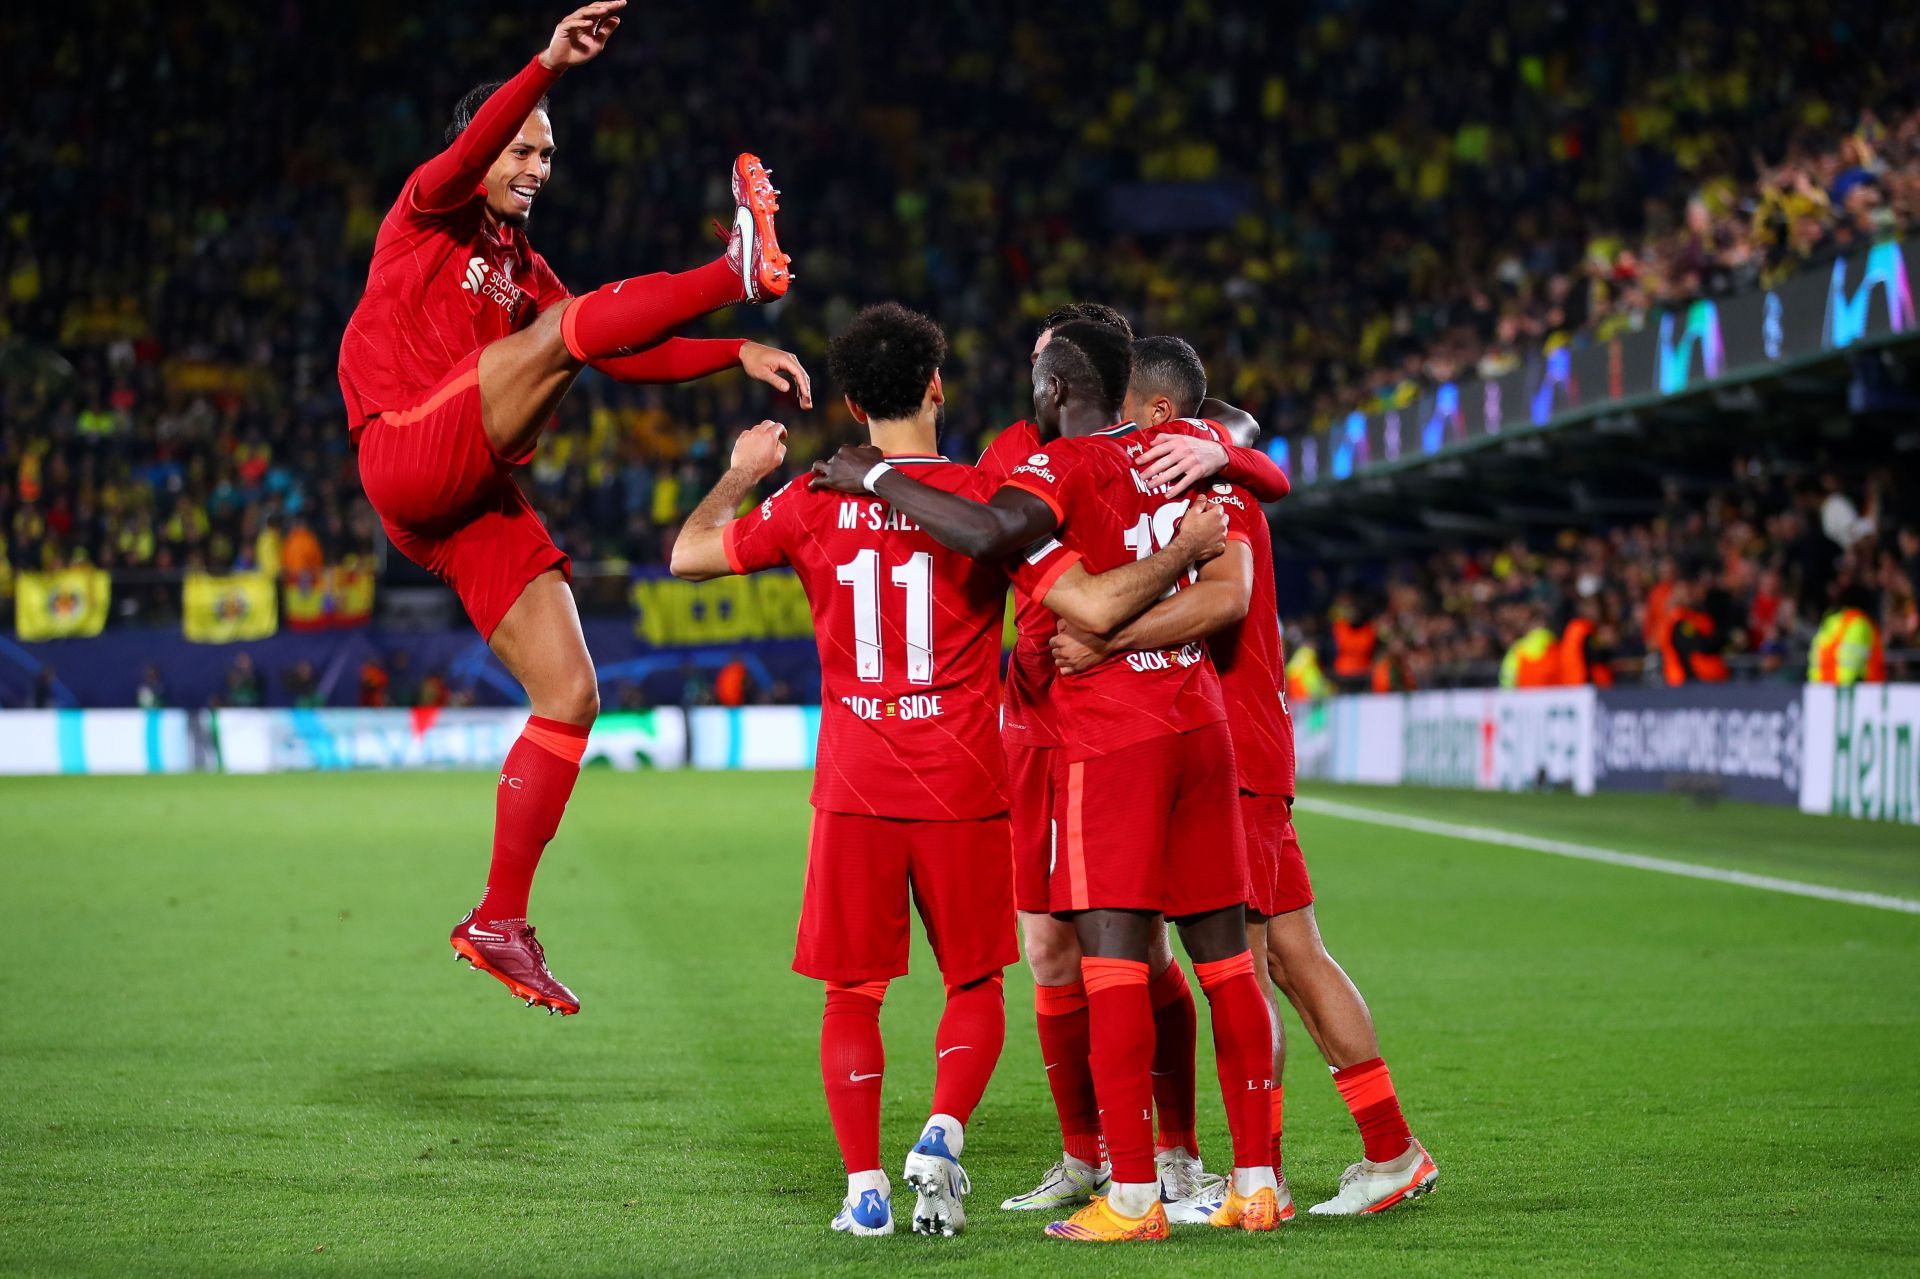 Liverpool players celebrate after scoring a goal.